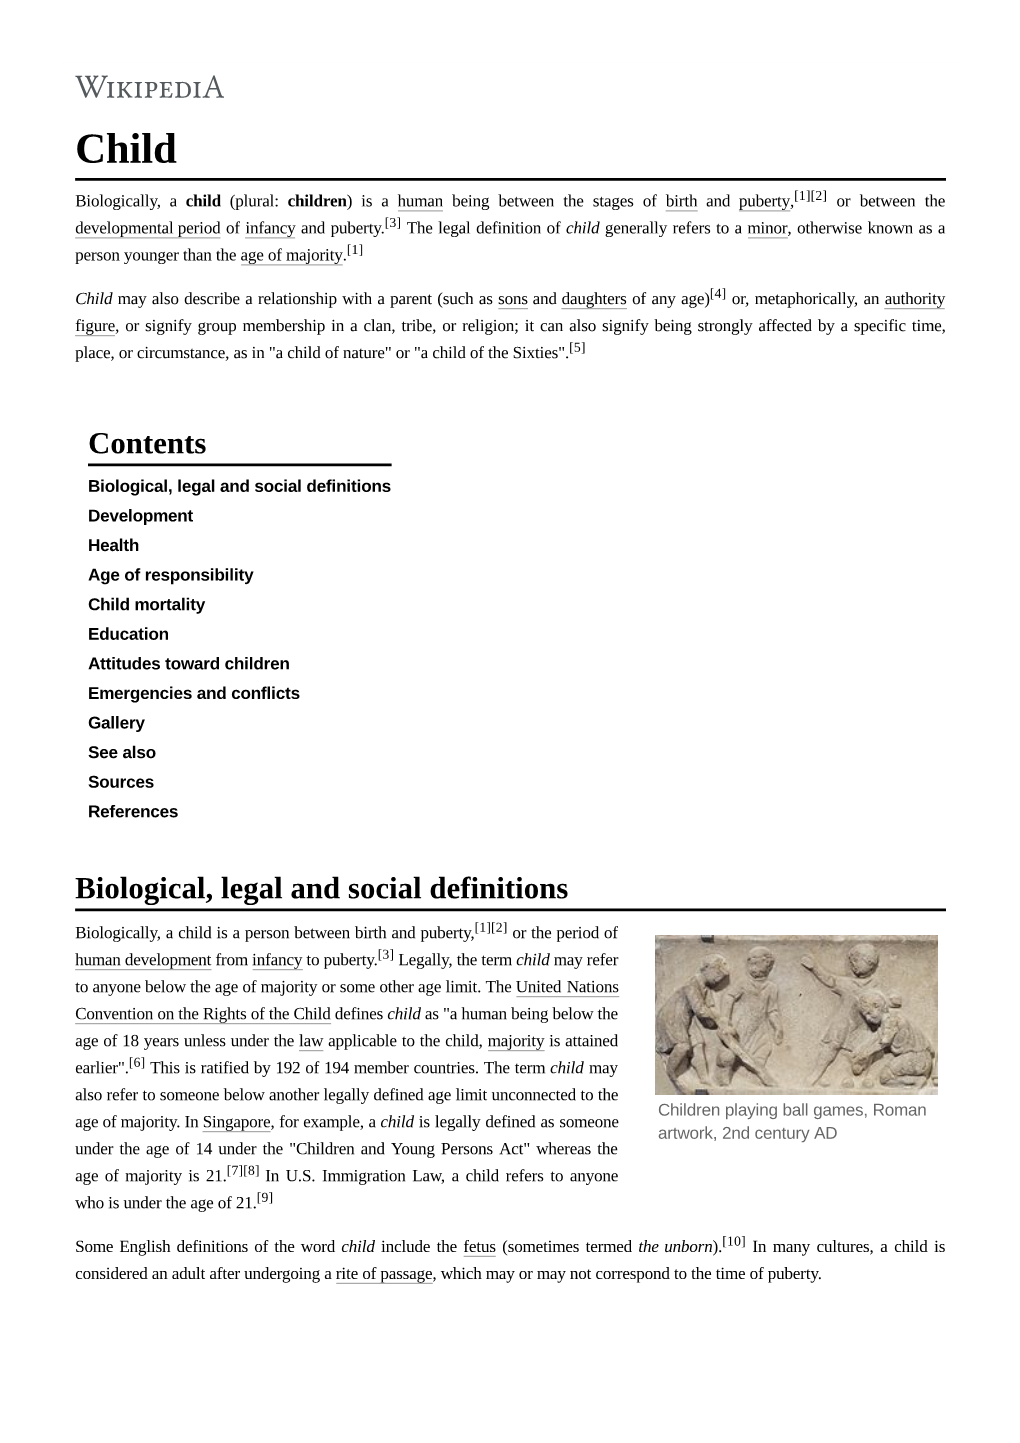 Contents Biological, Legal and Social Definitions